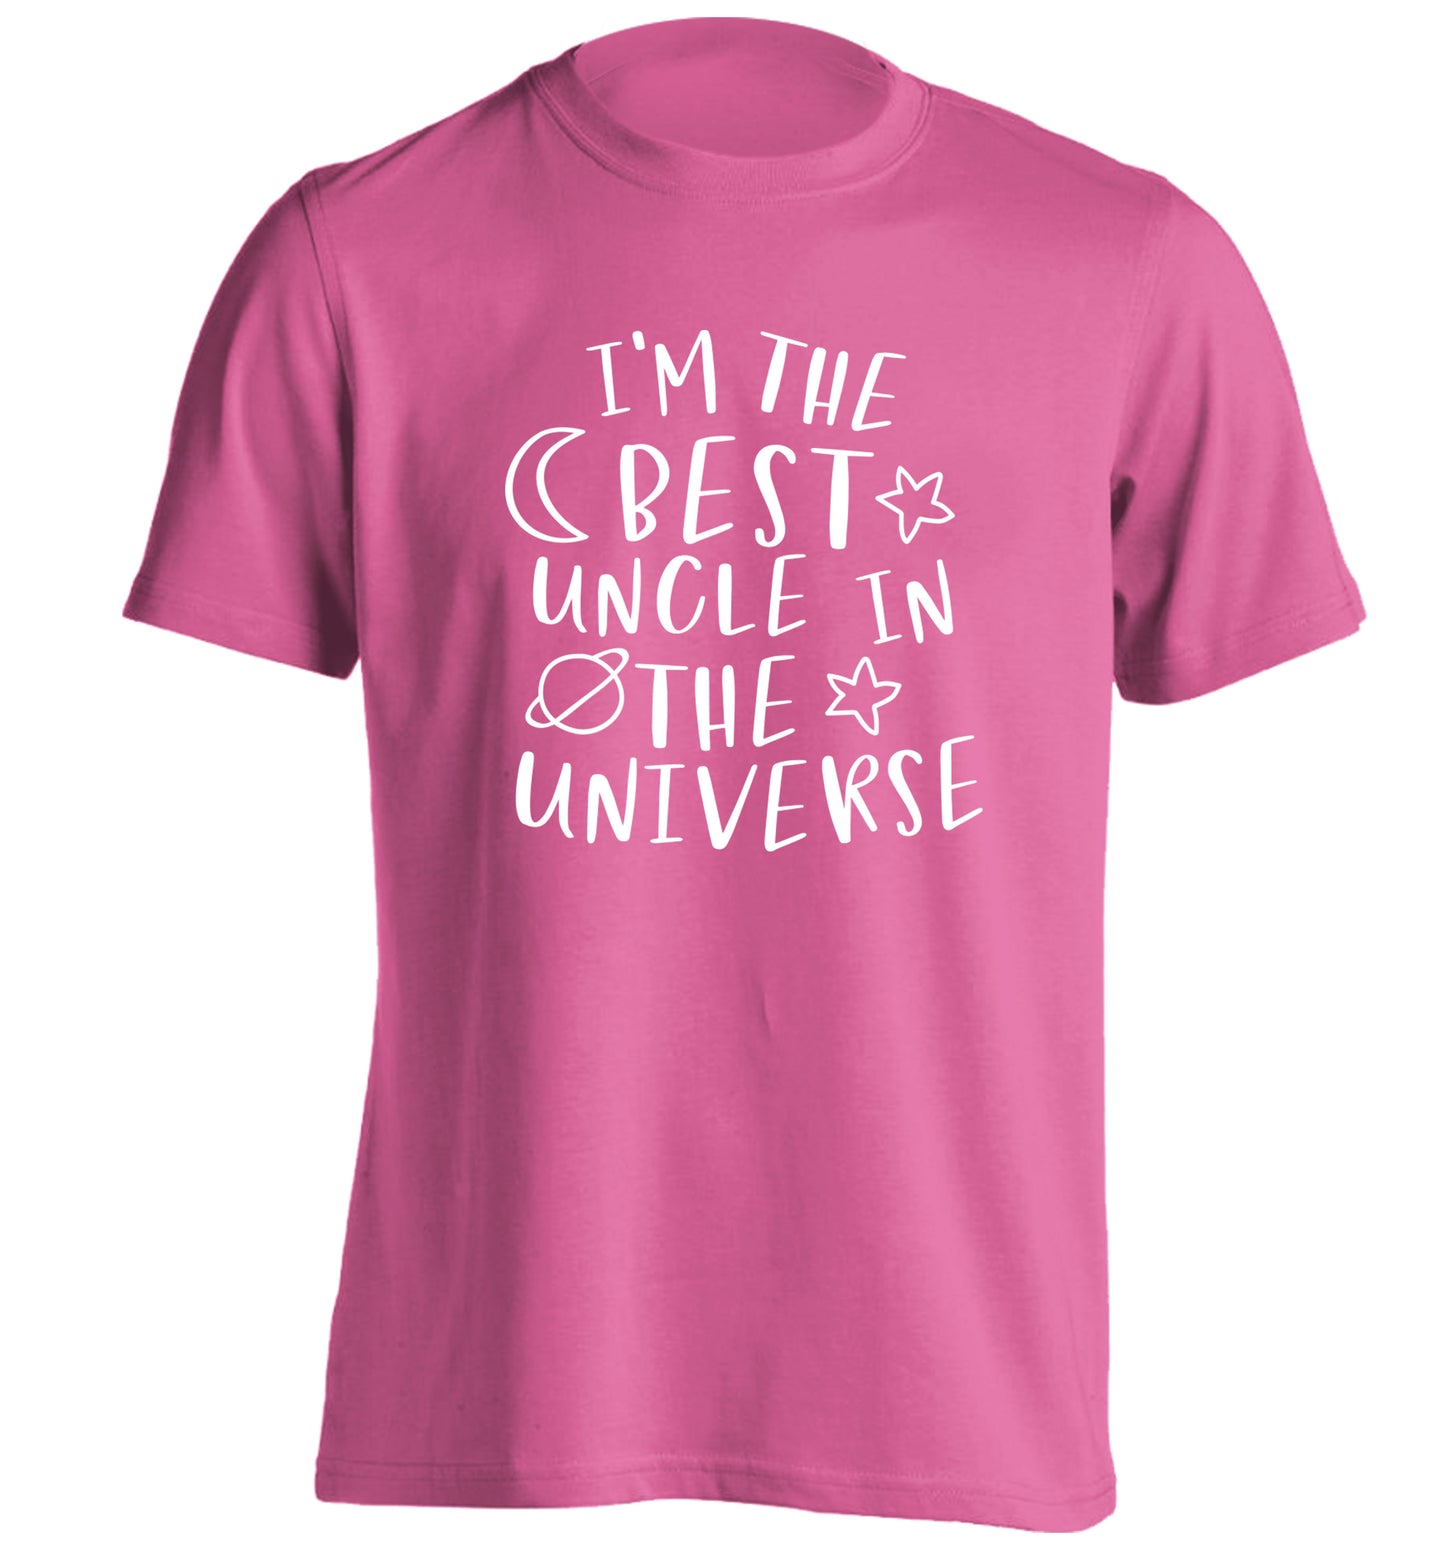 I'm the best uncle in the universe adults unisex pink Tshirt 2XL